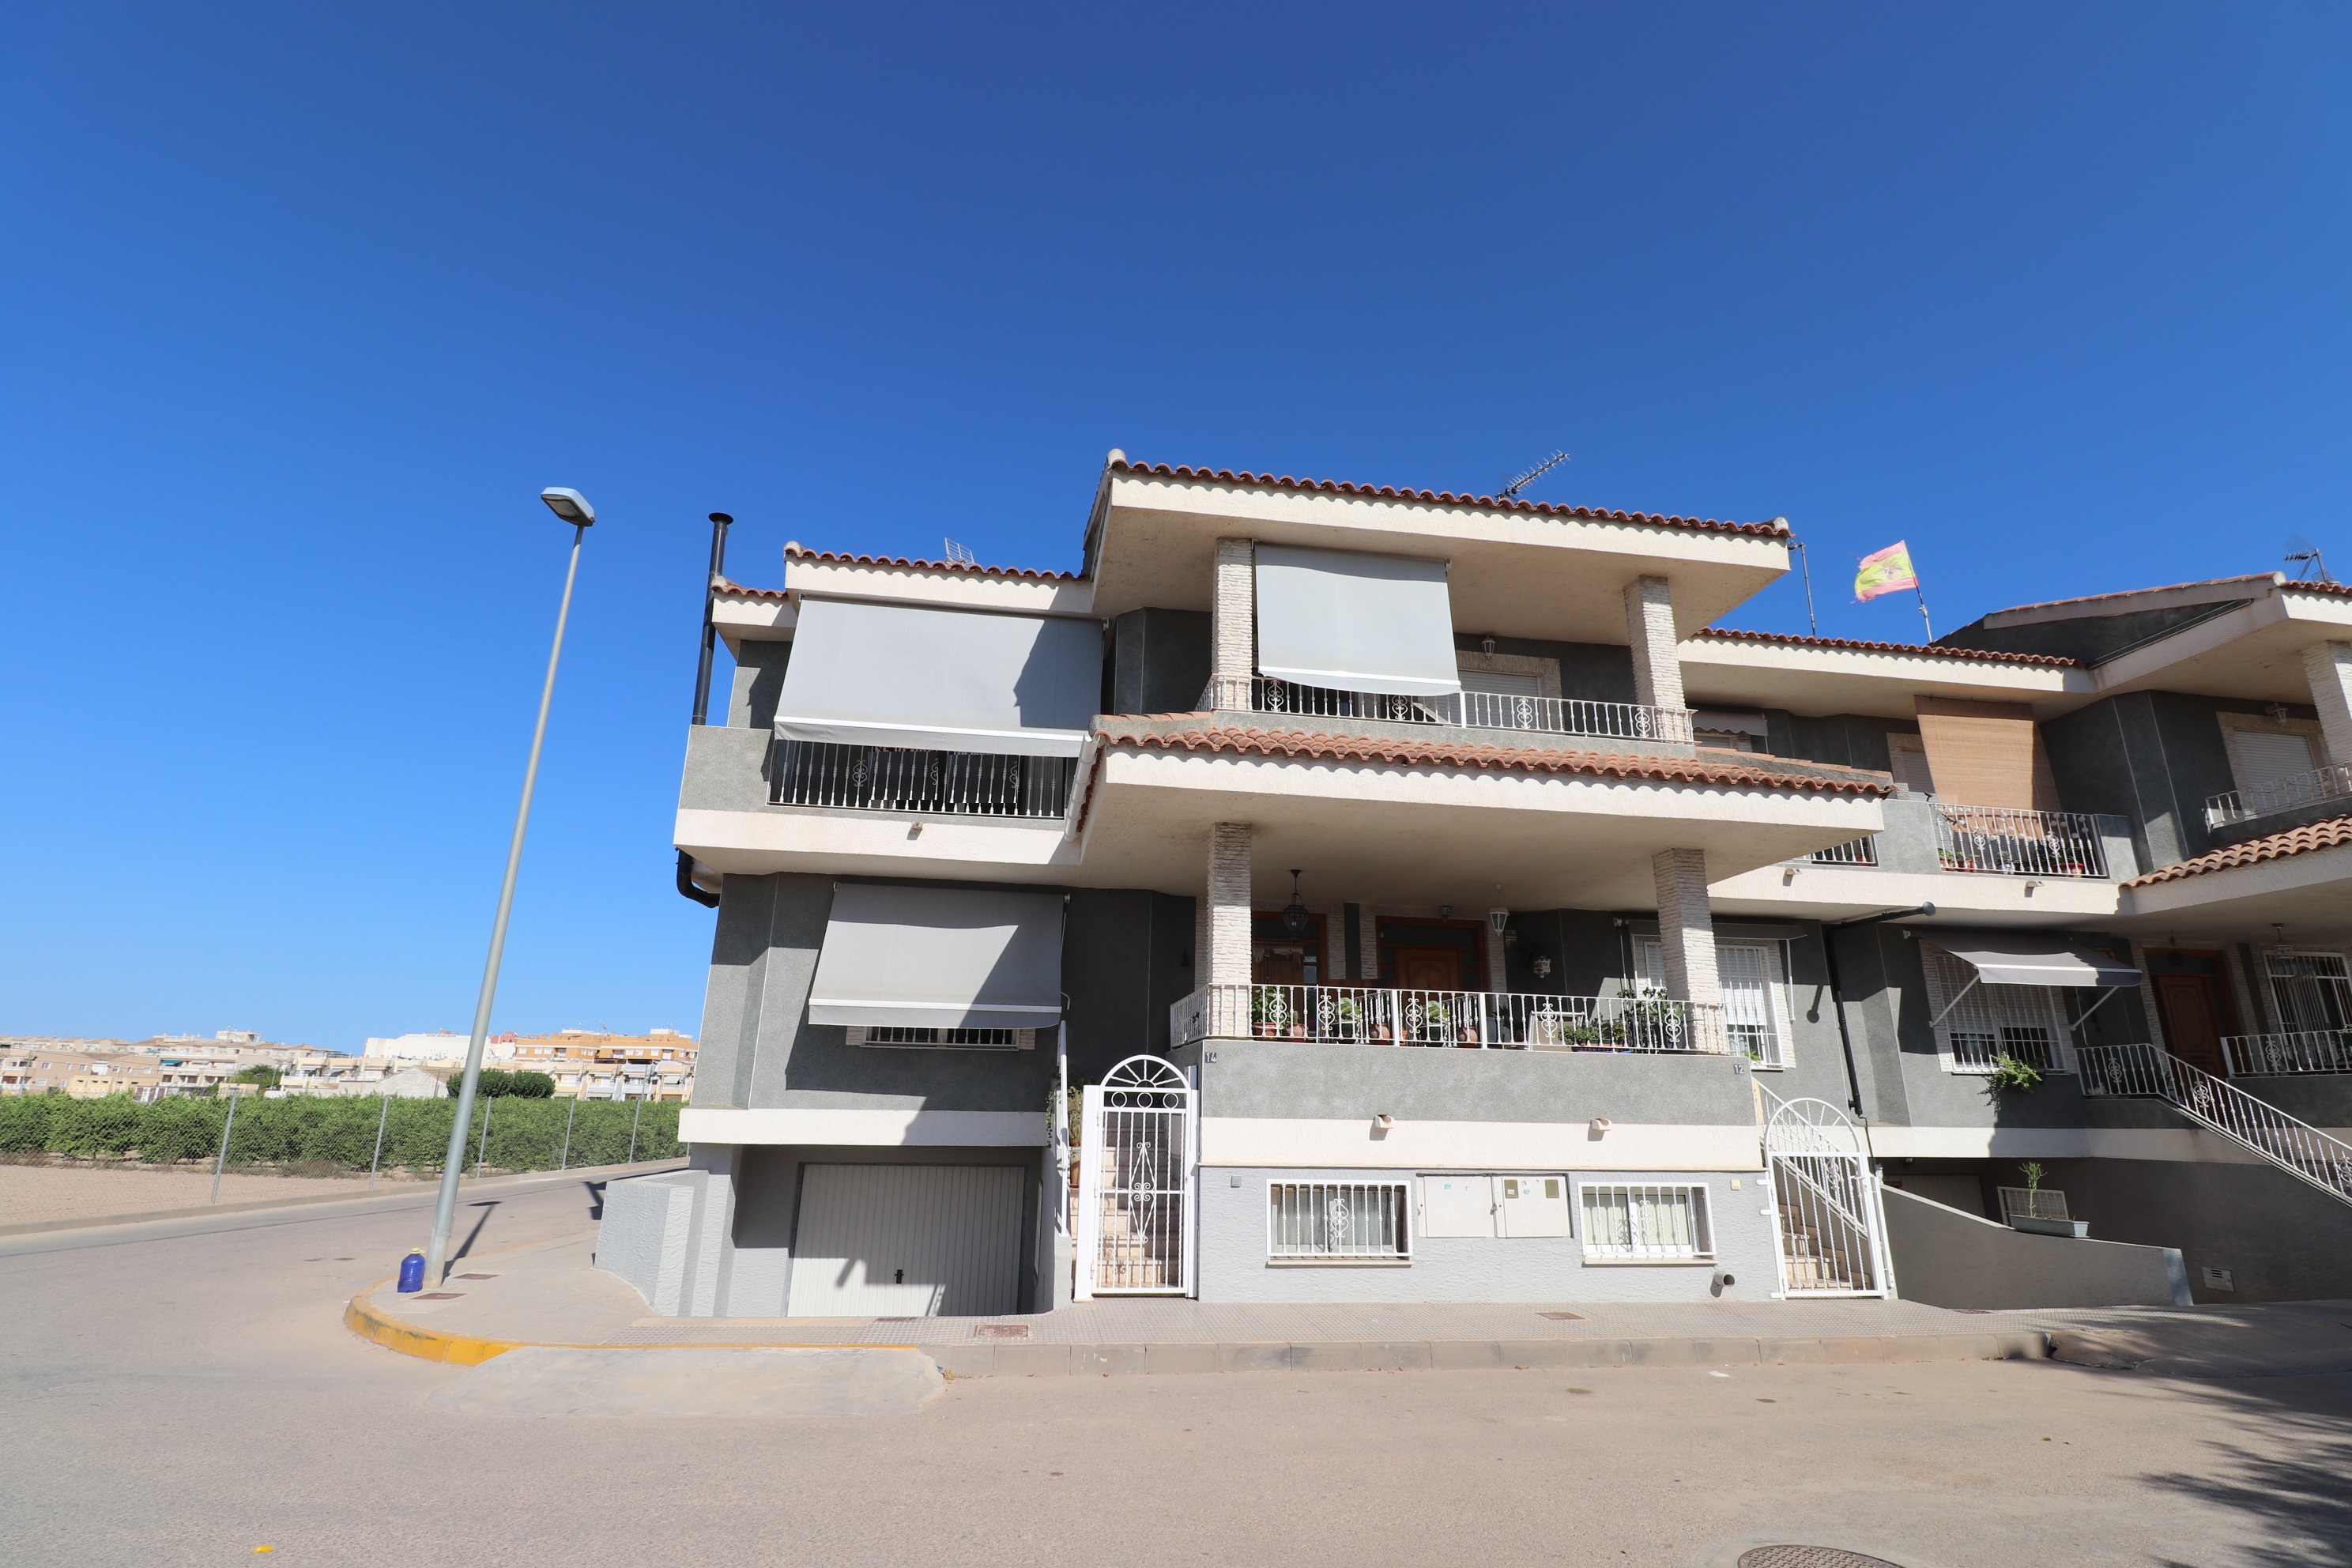 Qlistings - 3 Bedroom Townhouse For Sale In Rojales Property Image